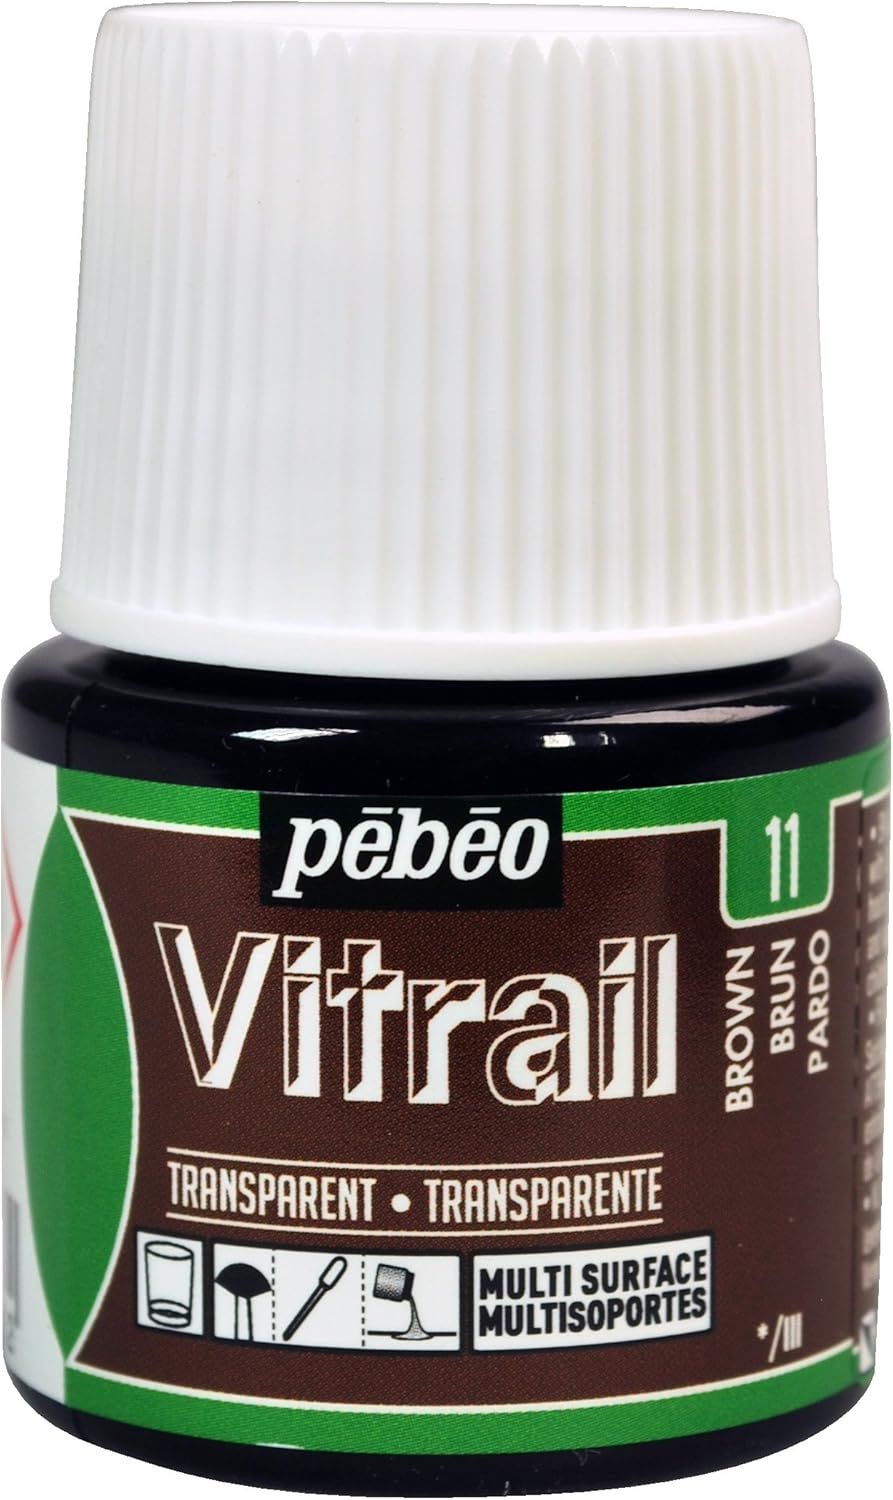 Pebeo Vitrail, Stained Glass Effect Paint, 45 ml Bottle - Brown | Amazon (US)